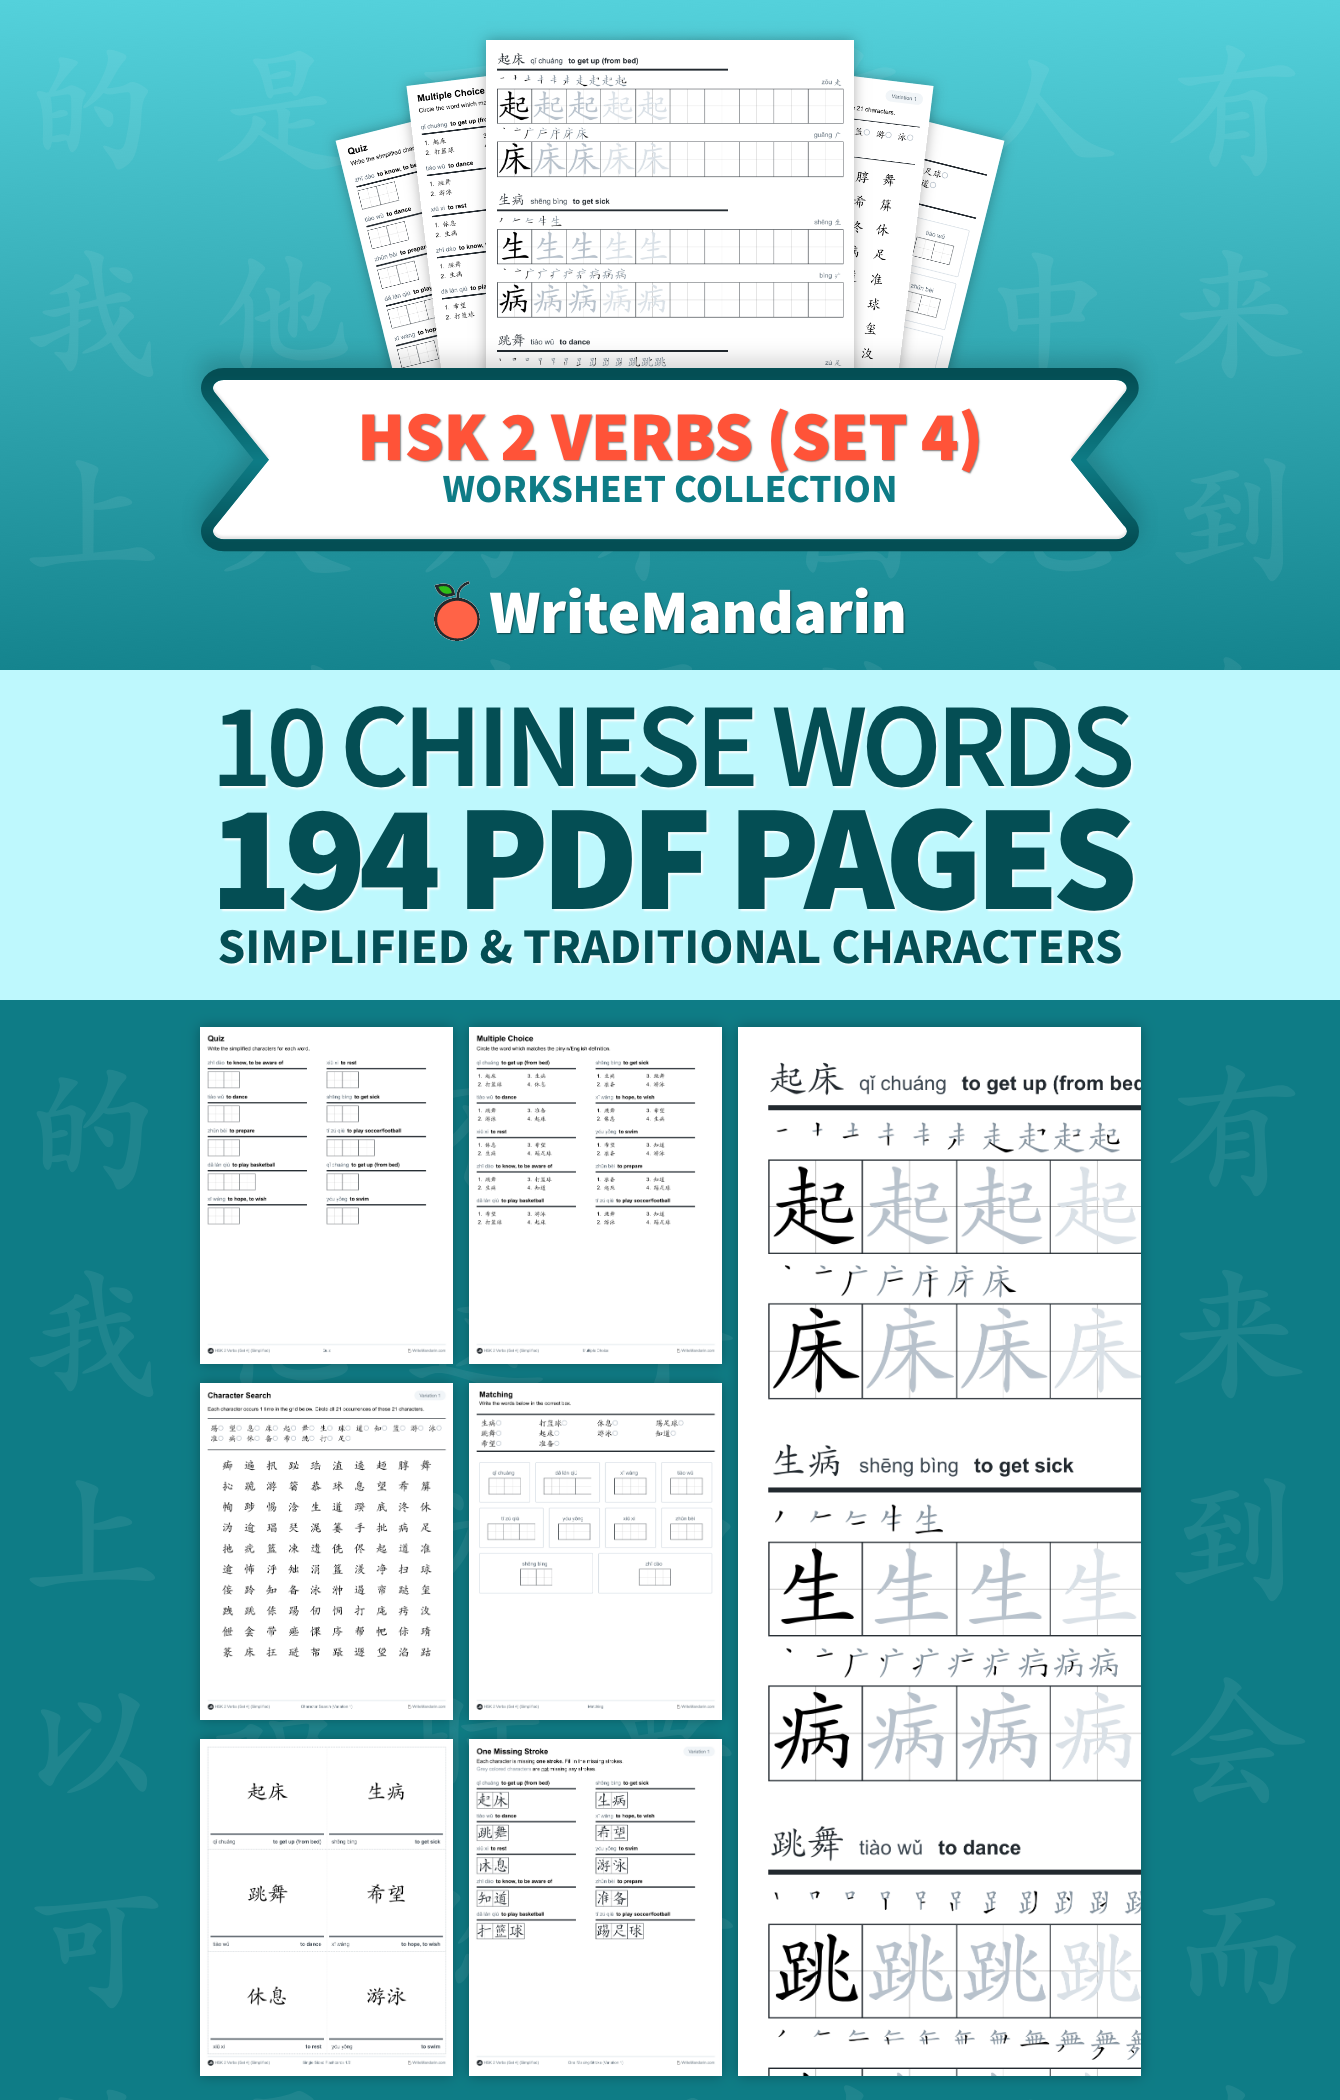 Preview image of HSK 2 Verbs (Set 4) worksheet collection